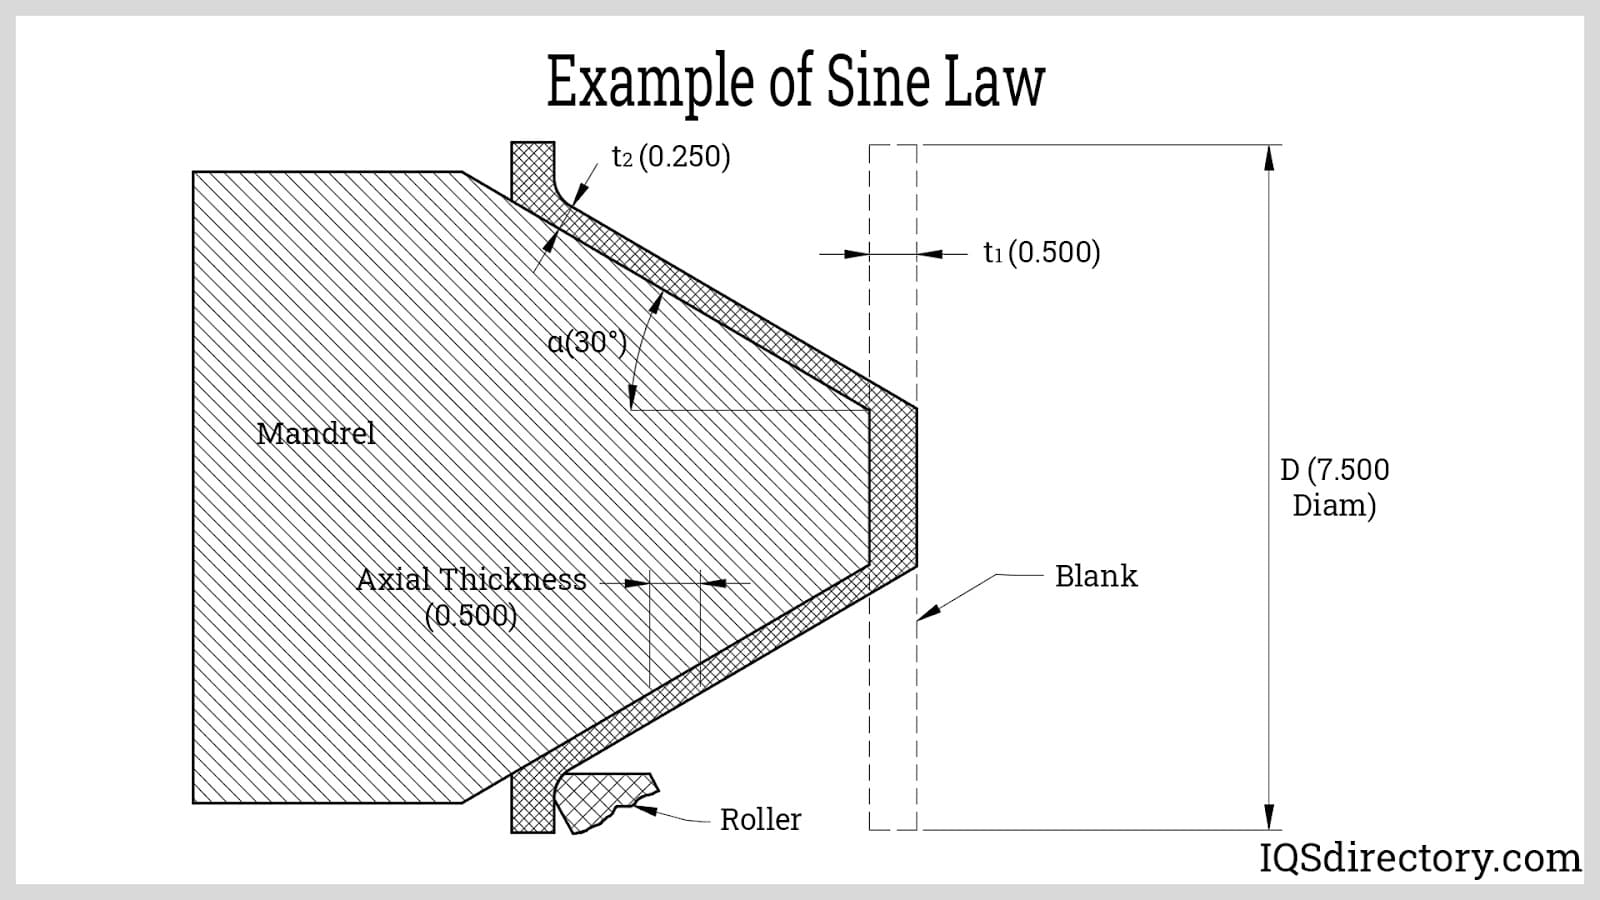 Example of Sine Law